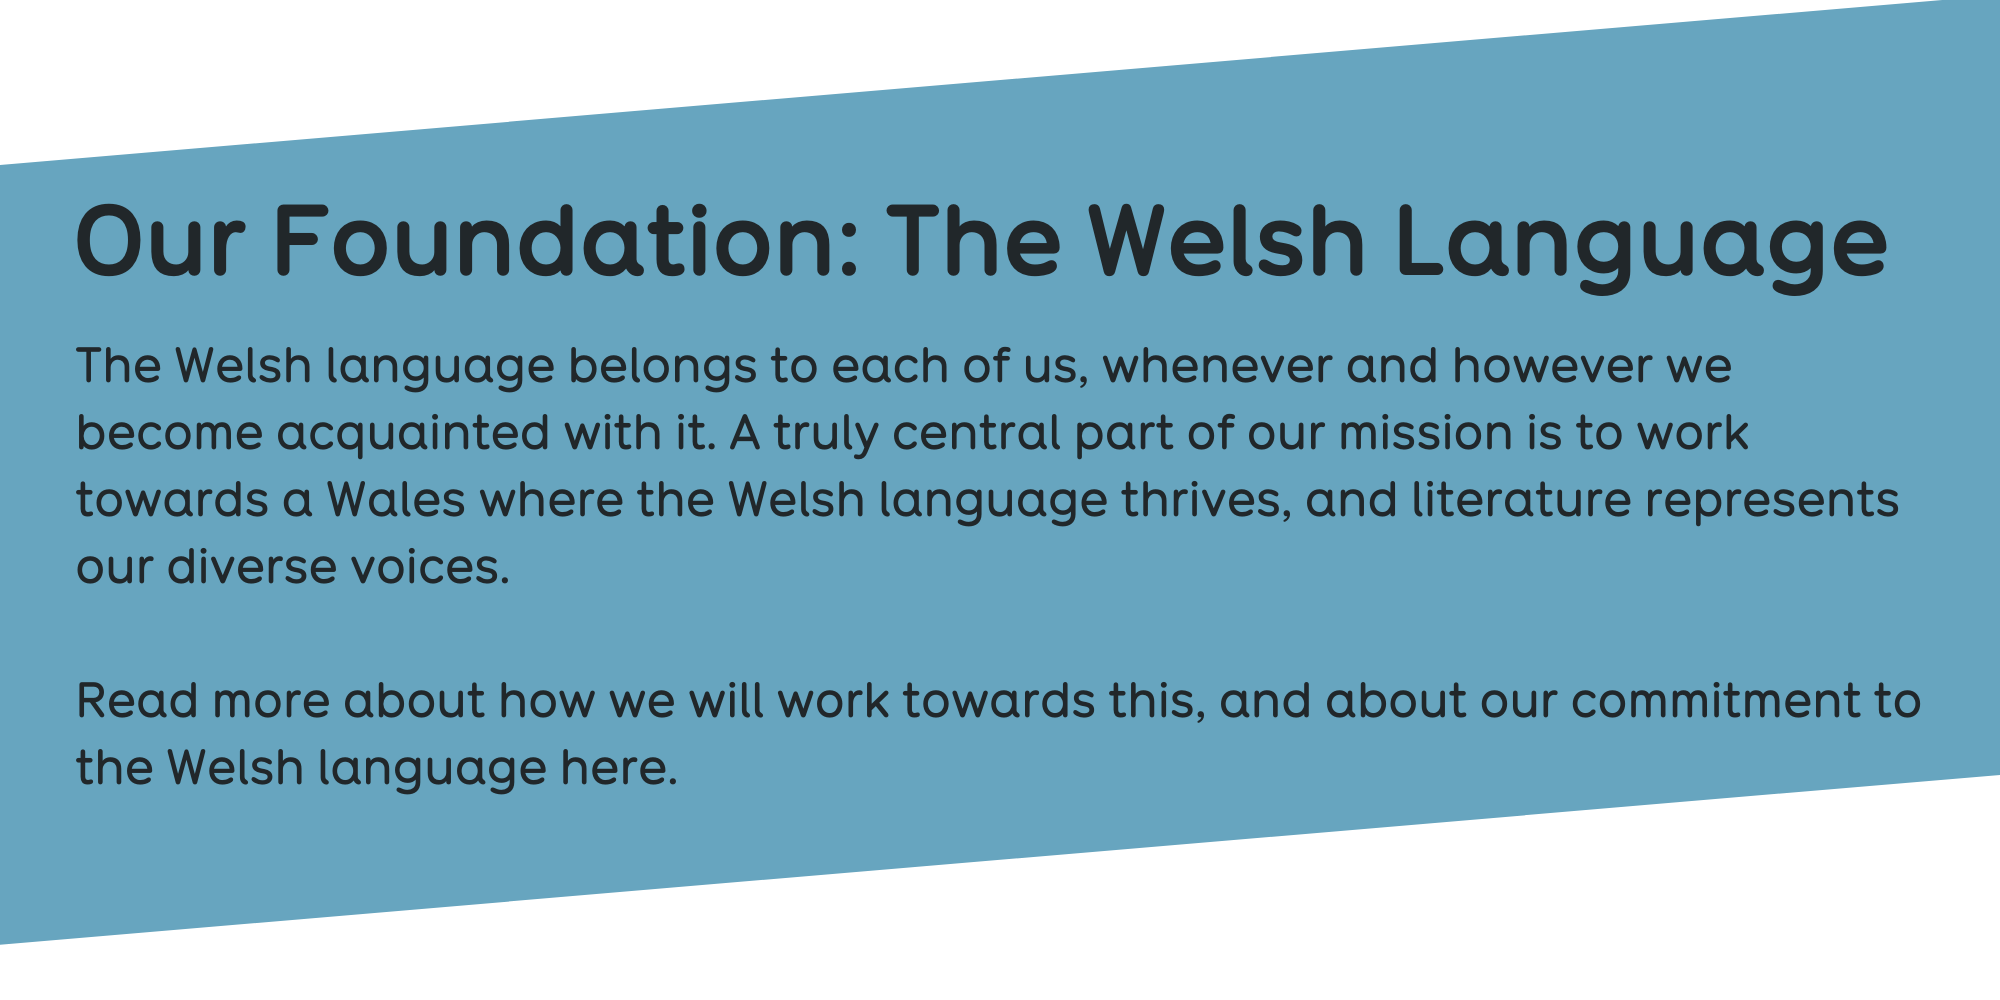 Our Foundation: The Welsh Language. The Welsh language belongs to each of us, whenever and however we become acquainted with it. A truly central part of our mission is to work towards a Wales where the Welsh language thrives, and literature represents our diverse voices. Read more about how we will work towards this, and about our commitment to the Welsh language here.